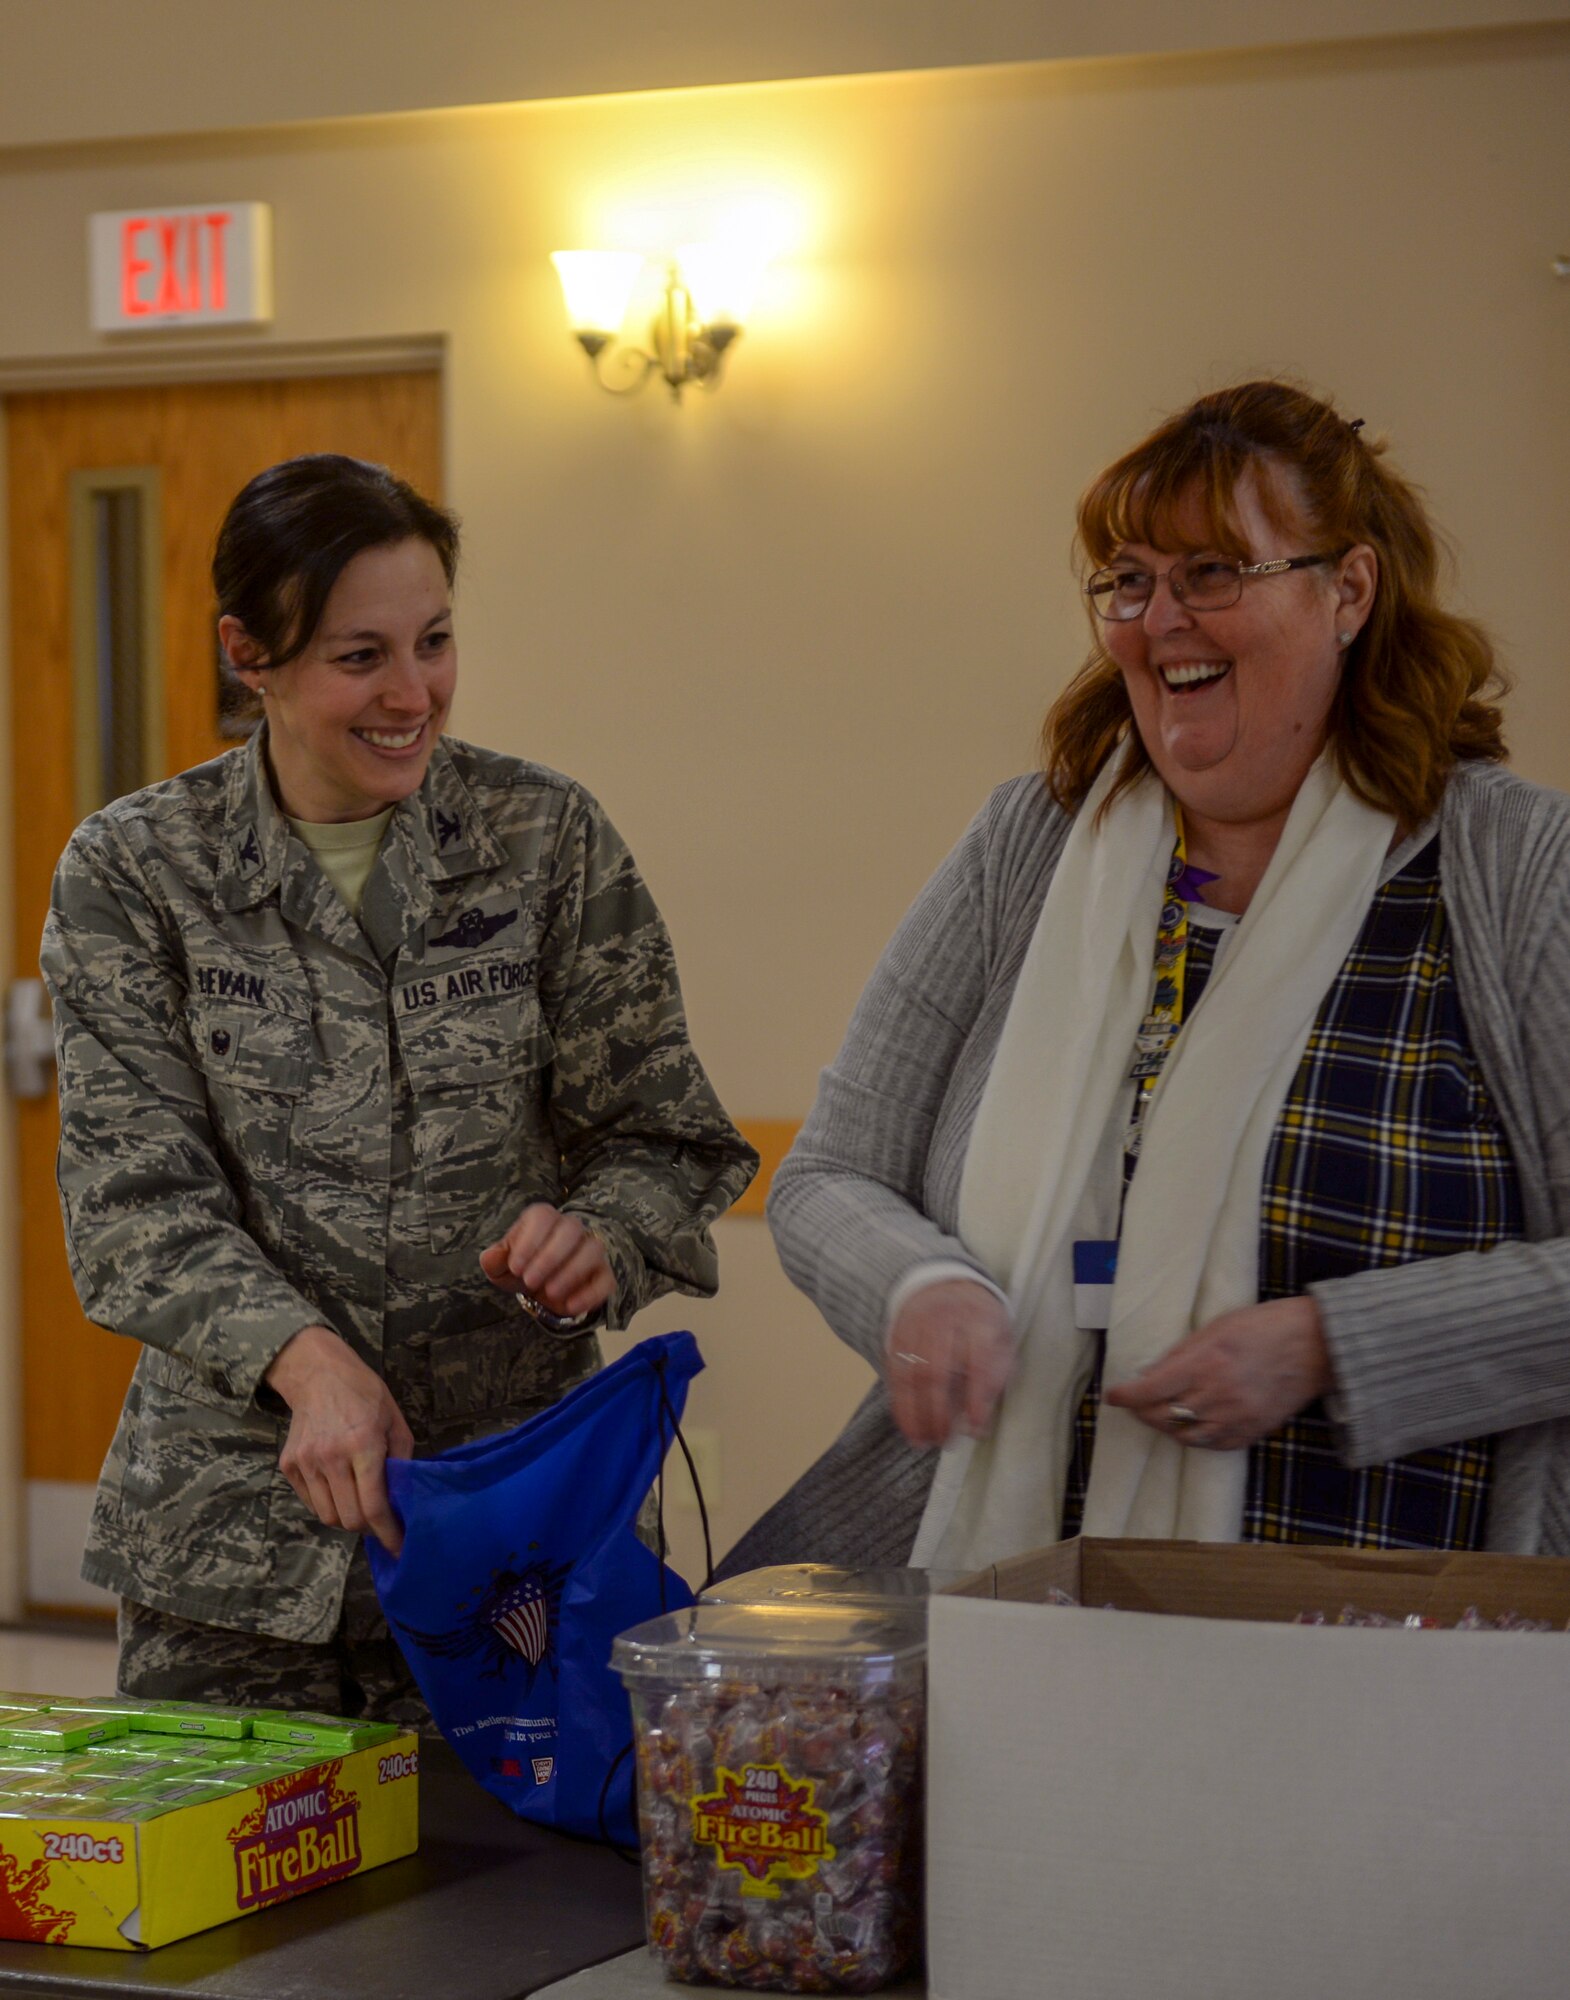 181204-F-IT794-1015 – Col. Sherri LeVan, 55th Wing vice commander, fills gift bags alongside members of the community at the Bellevue Volunteer Fire Department Dec. 6, 2018, as part as Operation Holiday Cheer. The Bellevue Chamber of Commerce started the program in 2003. (U.S. Air Force photo by Tech. Sgt. Rachelle Blake)